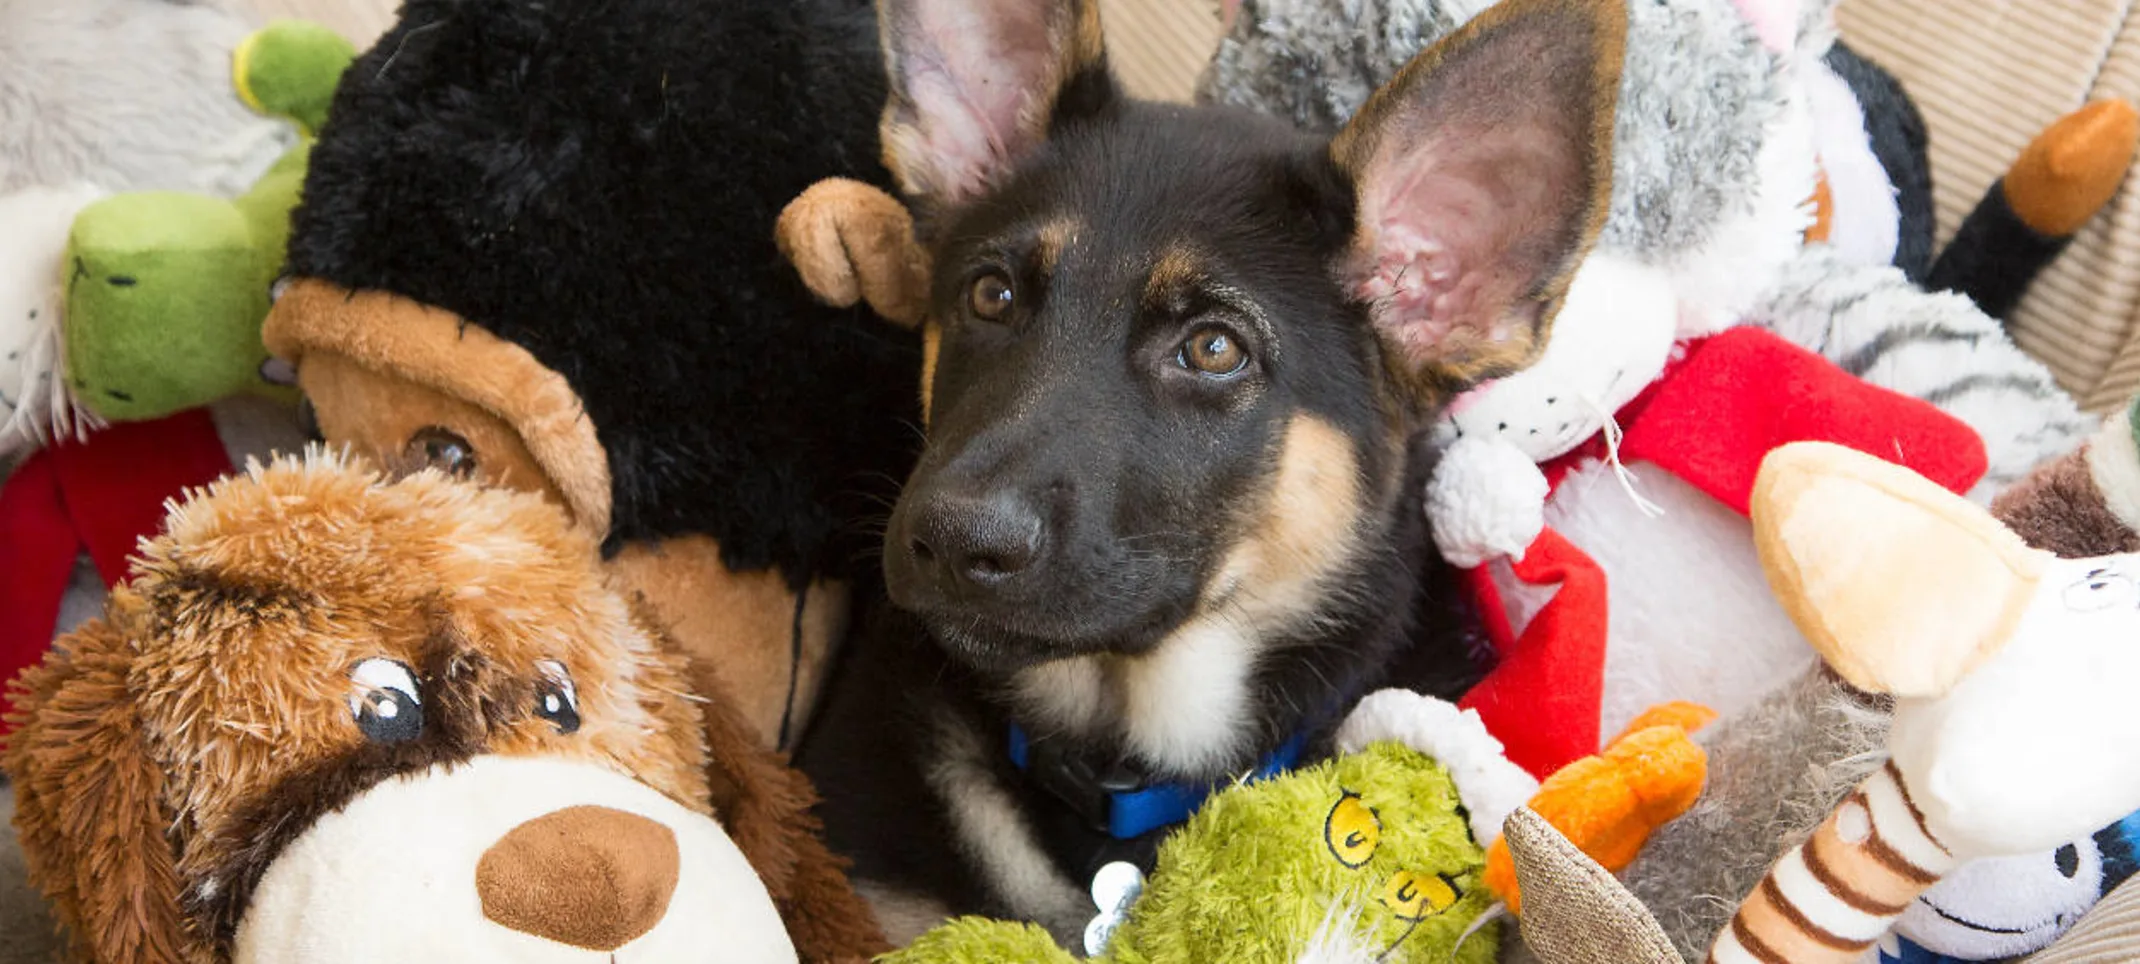 A GSD puppy sitting in a bed surrounded by toys